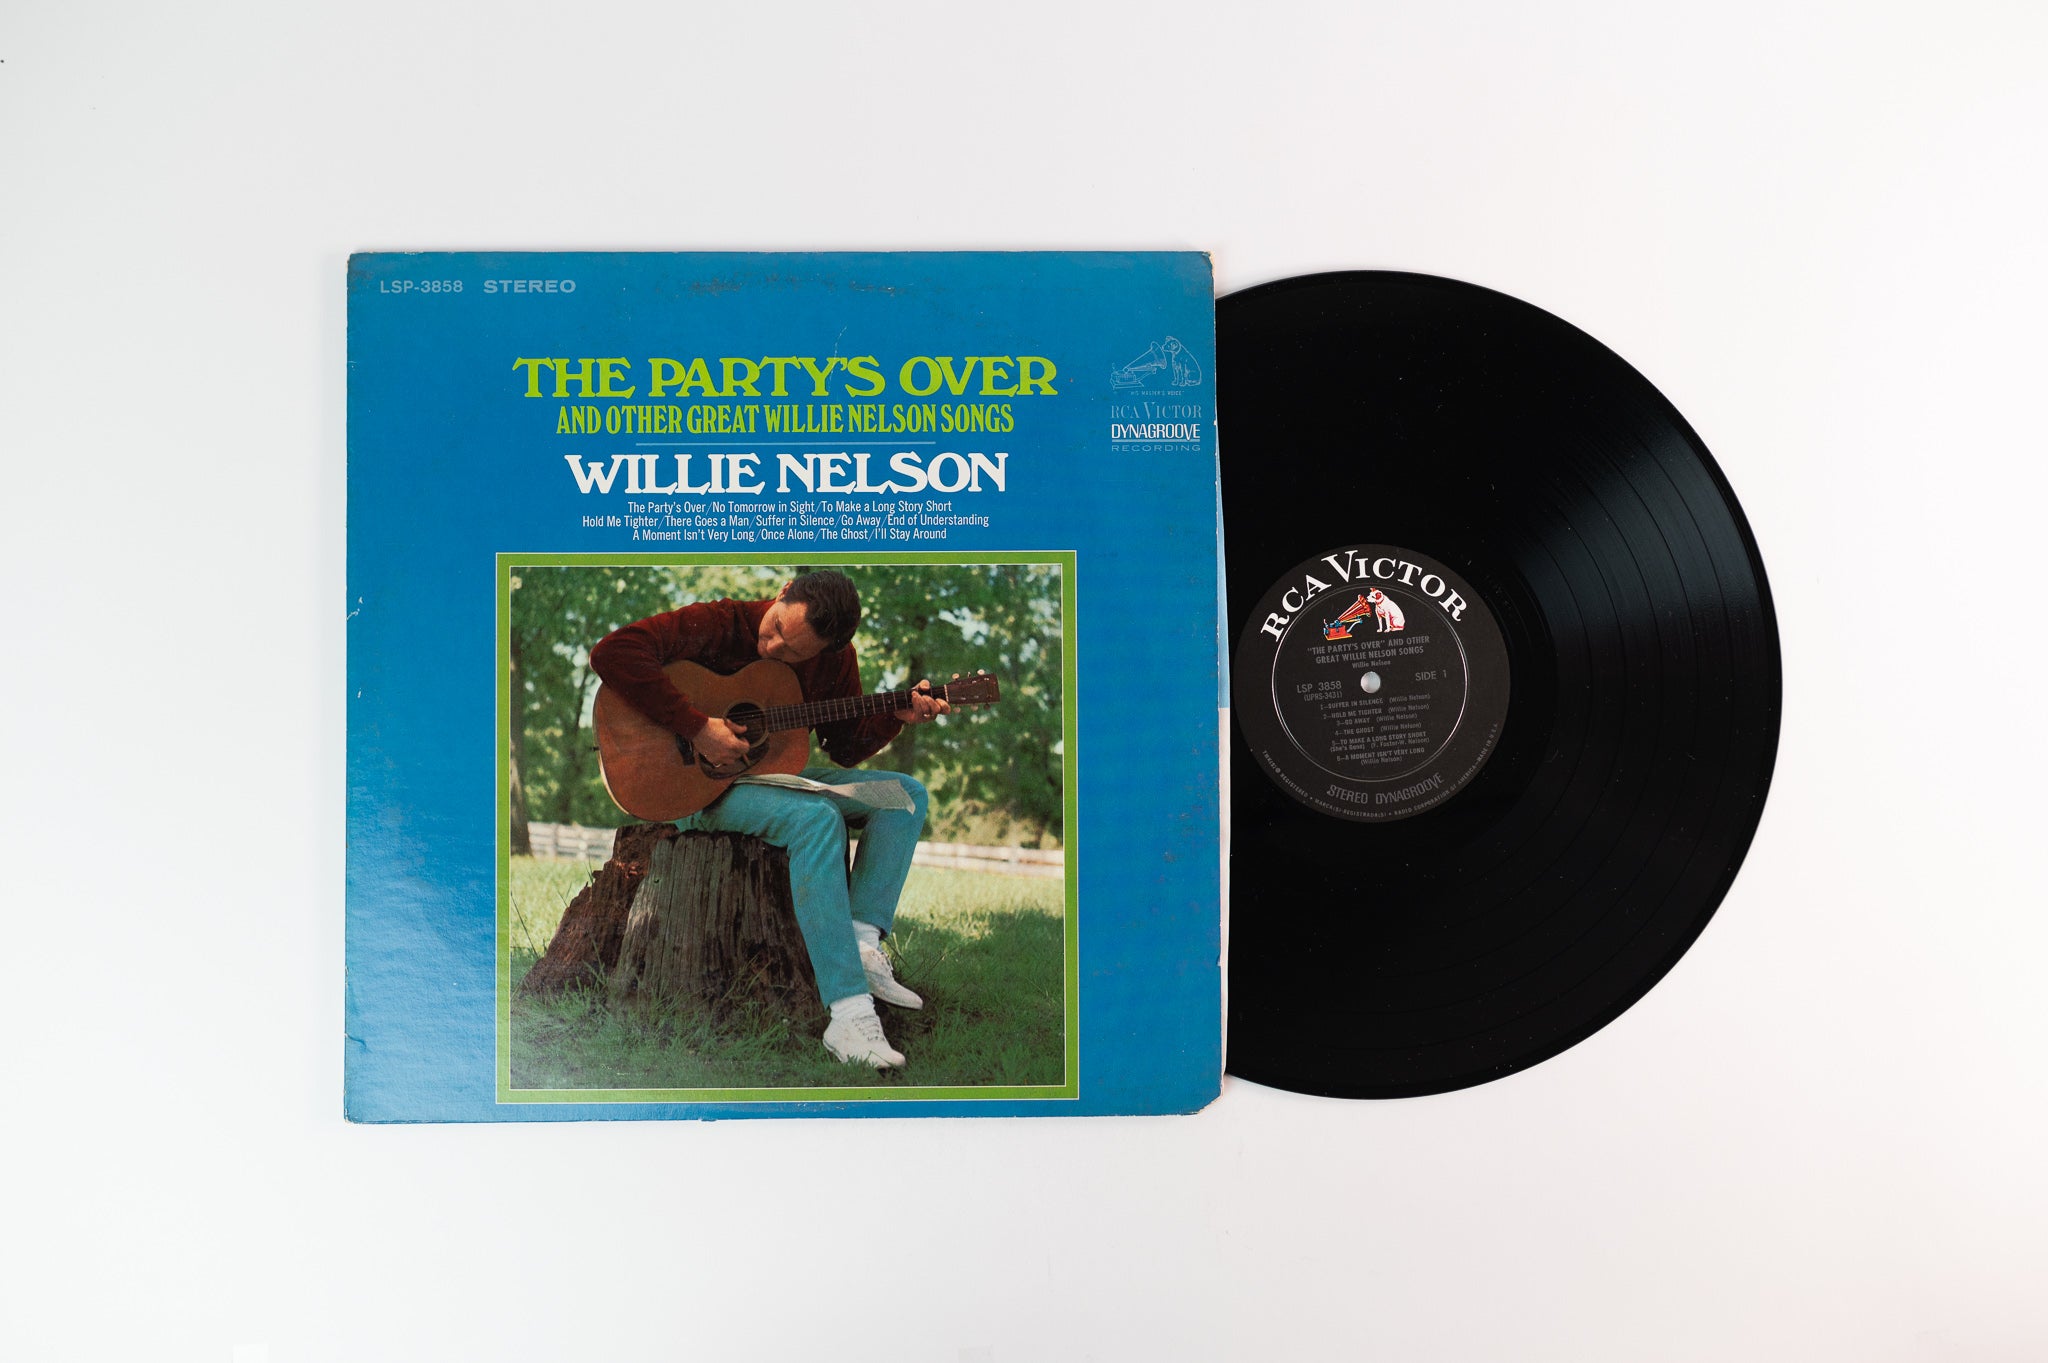 Willie Nelson - The Party's Over on RCA Victor